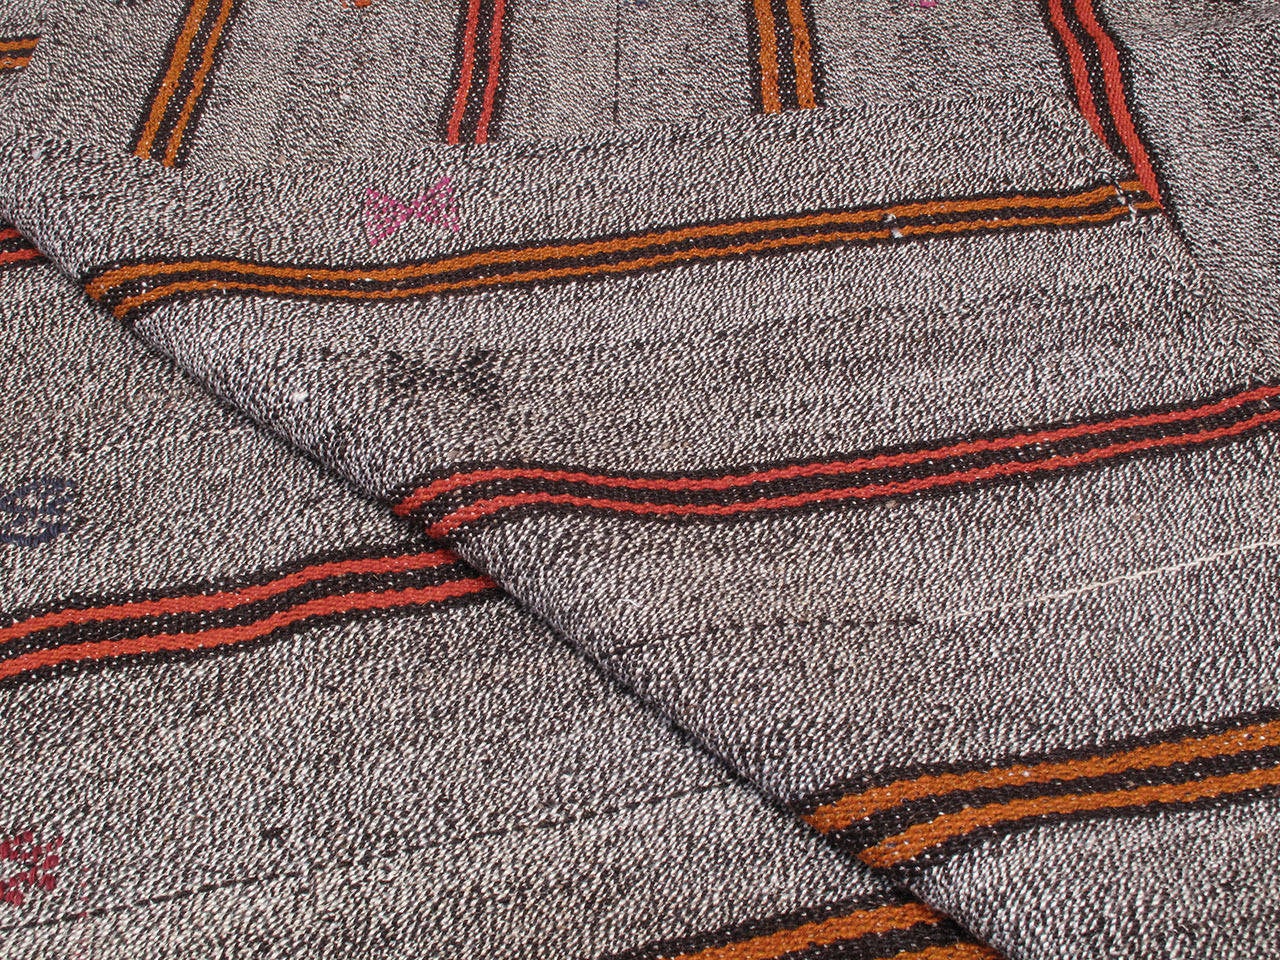 Goat Hair and Cotton Kilim with Stripes 1